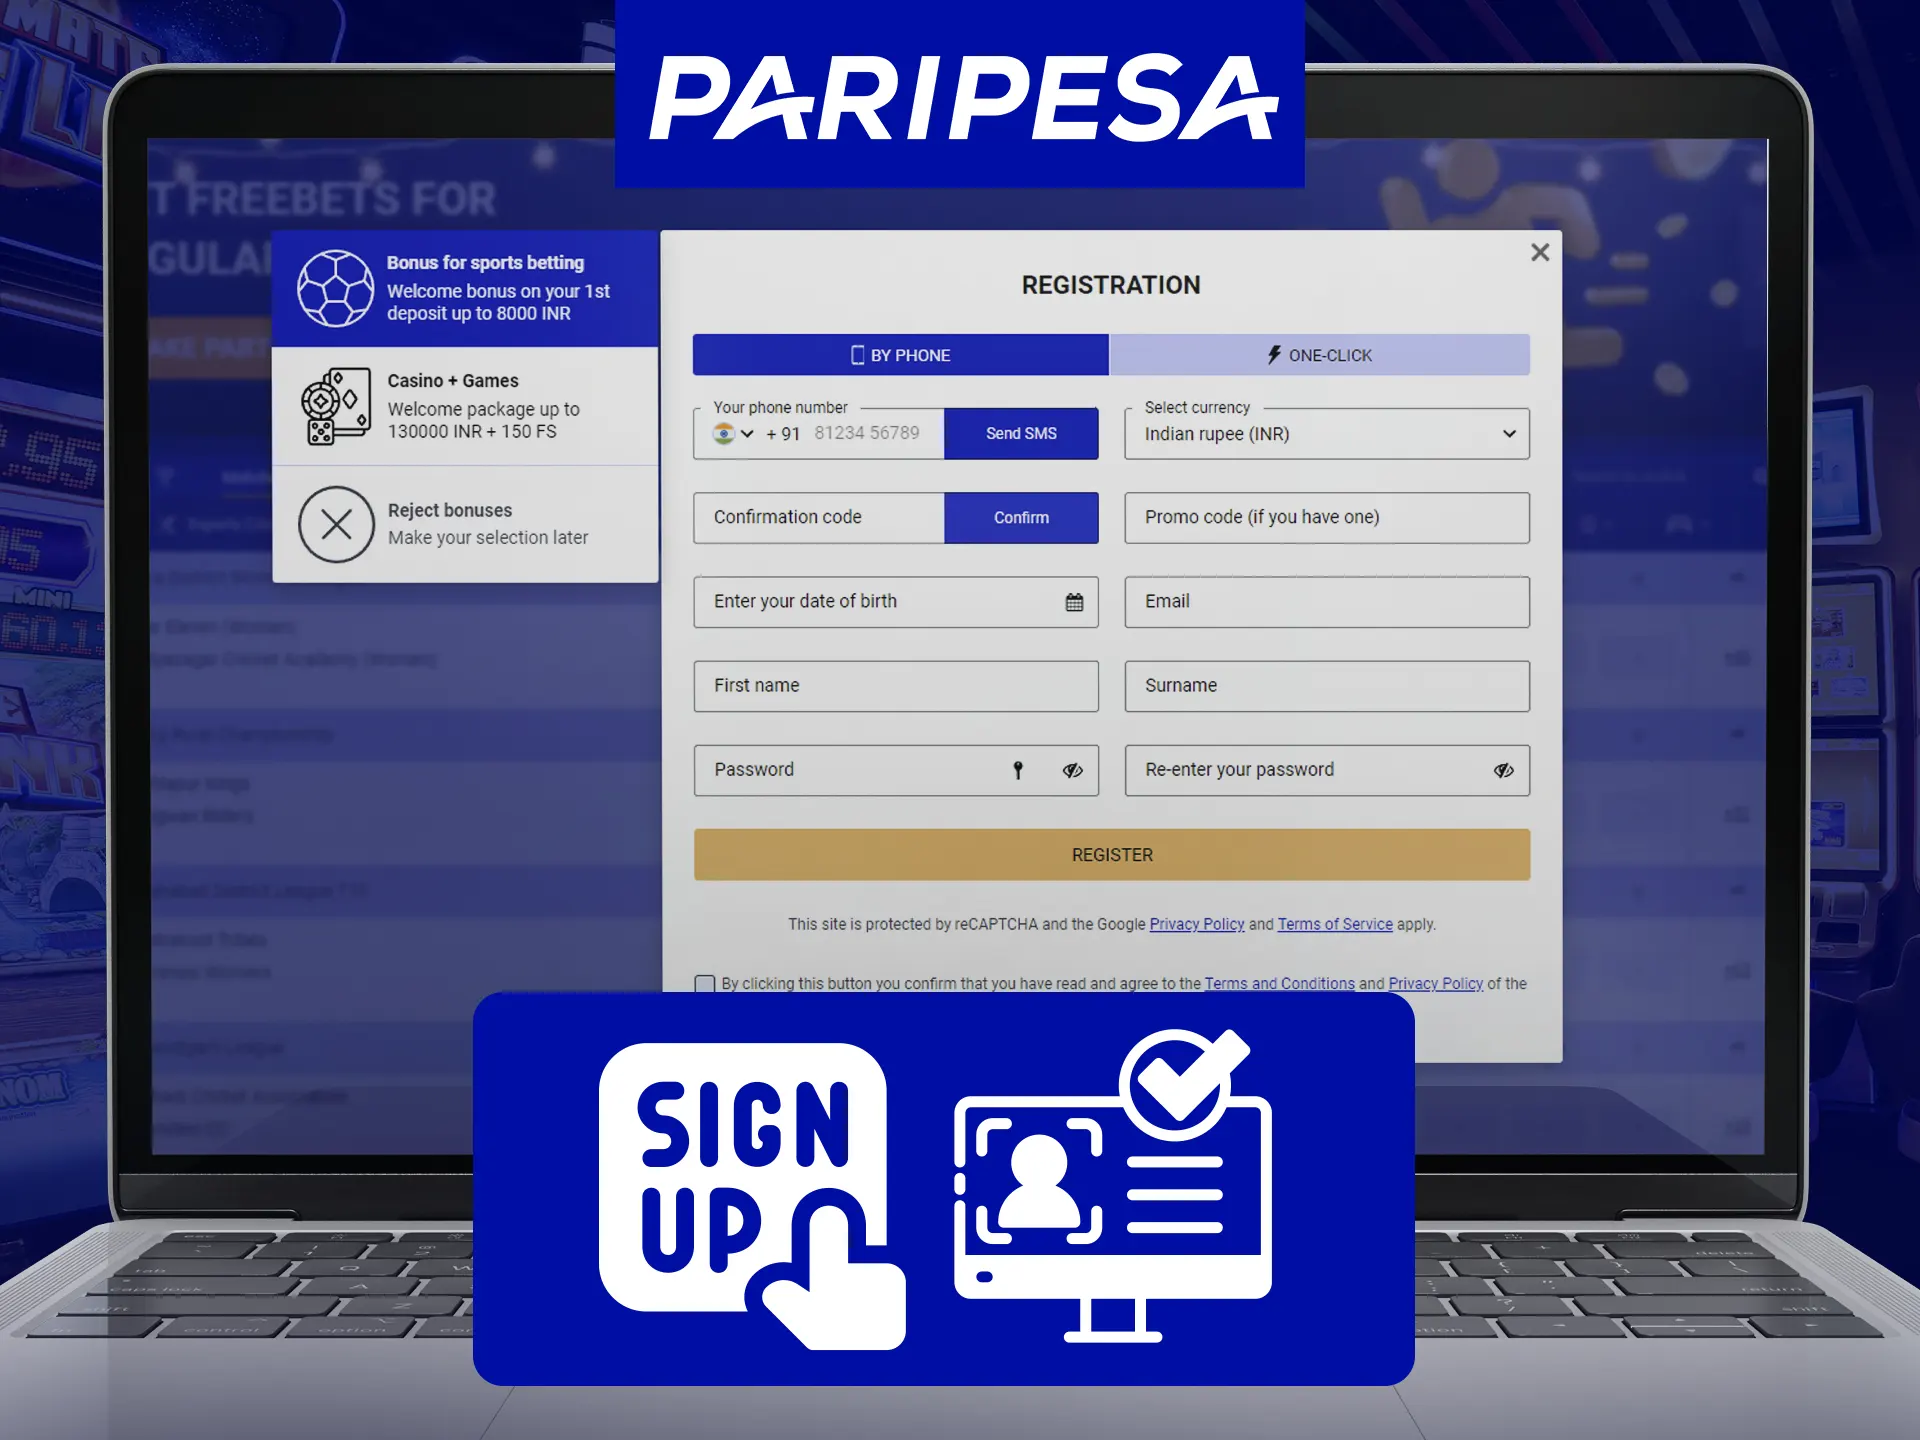 To register at Paripesa click the button, fill form, 1-click option available, provide personal data and documents.